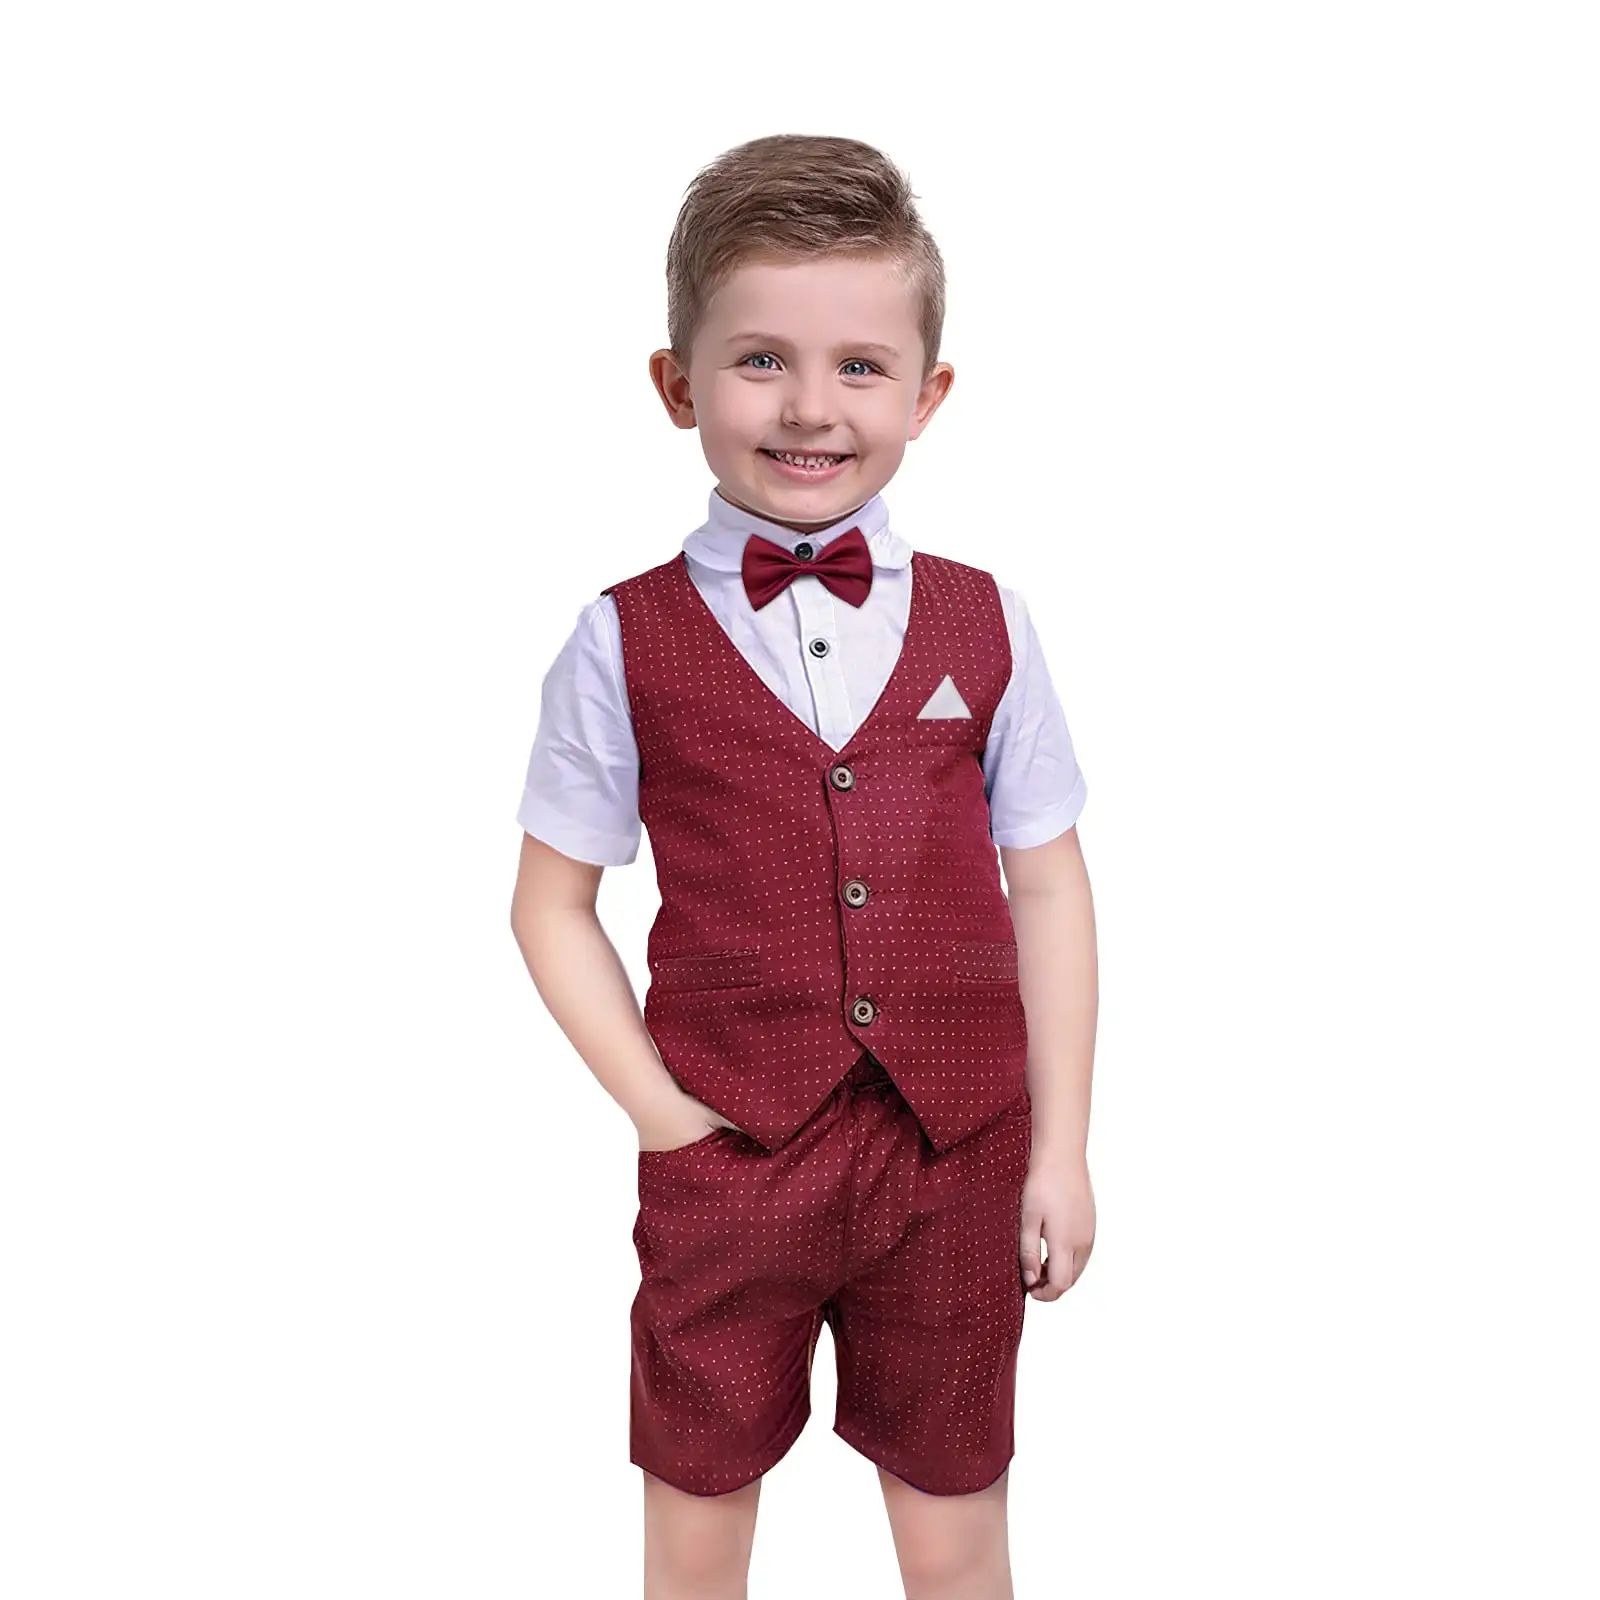 Suits for Boys Kids Summer Tuxedo Outfit Short Sleeve White Shirt Bowtie Shorts Vest Formal Dress 3-7 Years